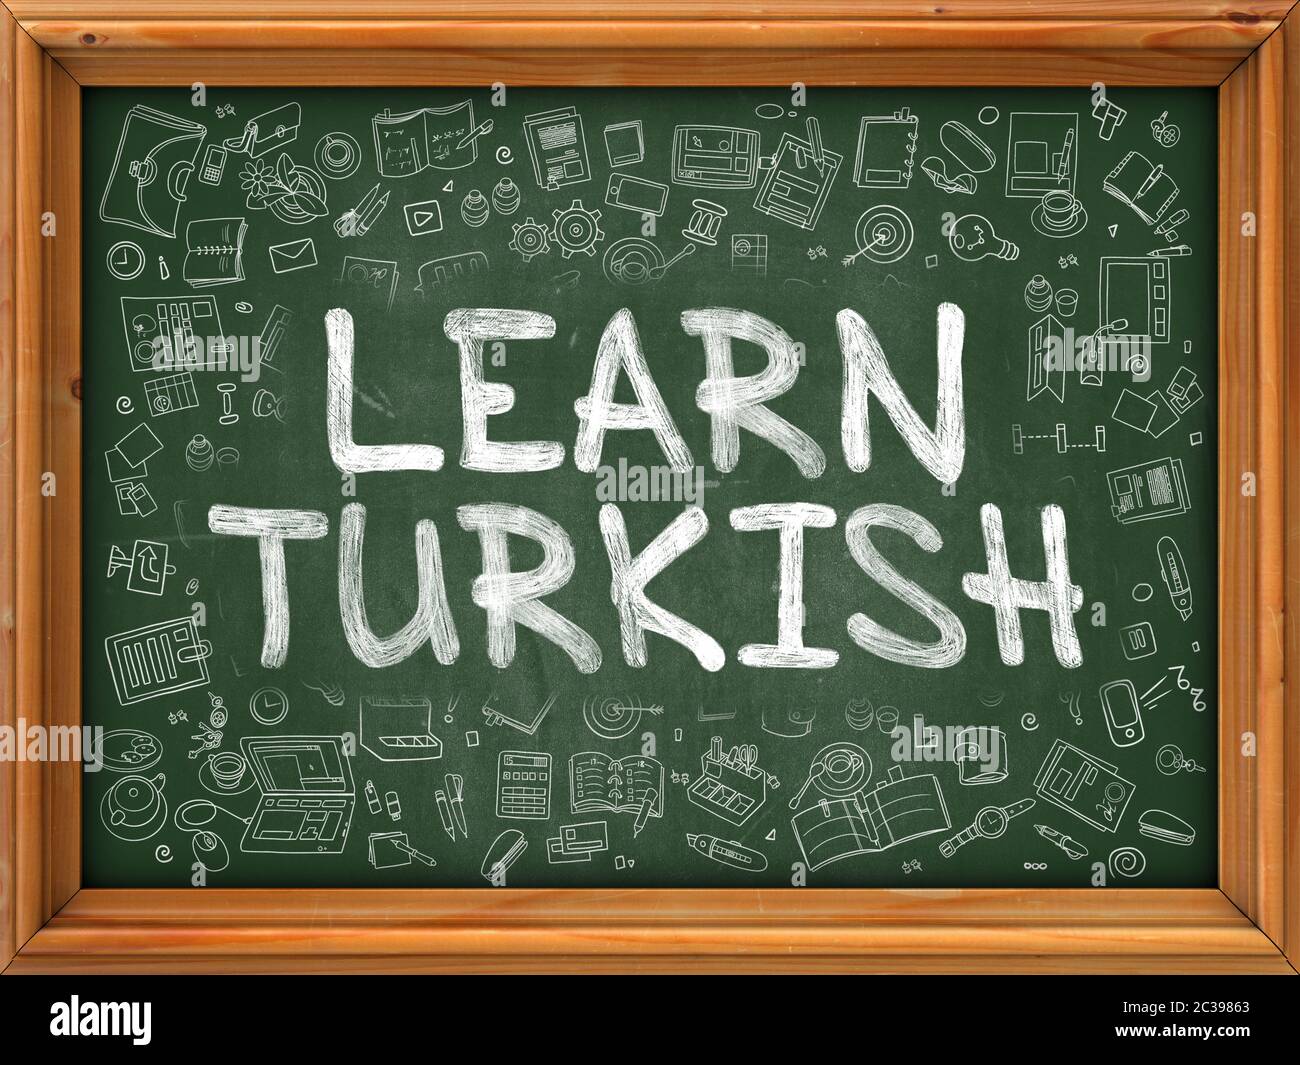 Green Chalkboard with Hand Drawn Learn Turkish with Doodle Icons Around. Line Style Illustration. Stock Photo